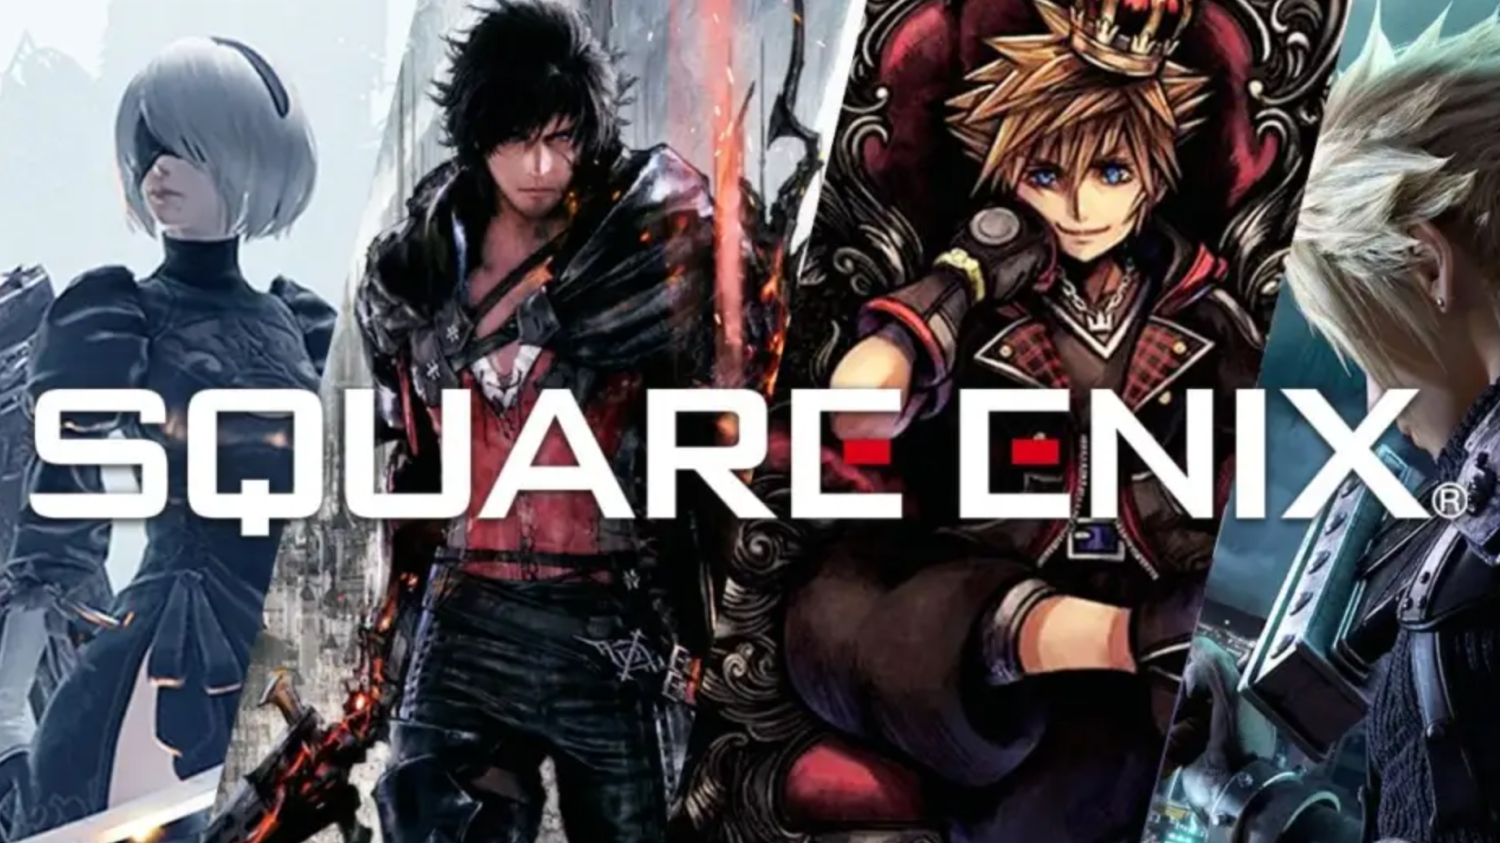 PlayStation's Latest Square Enix Exclusive: What We Know So Far